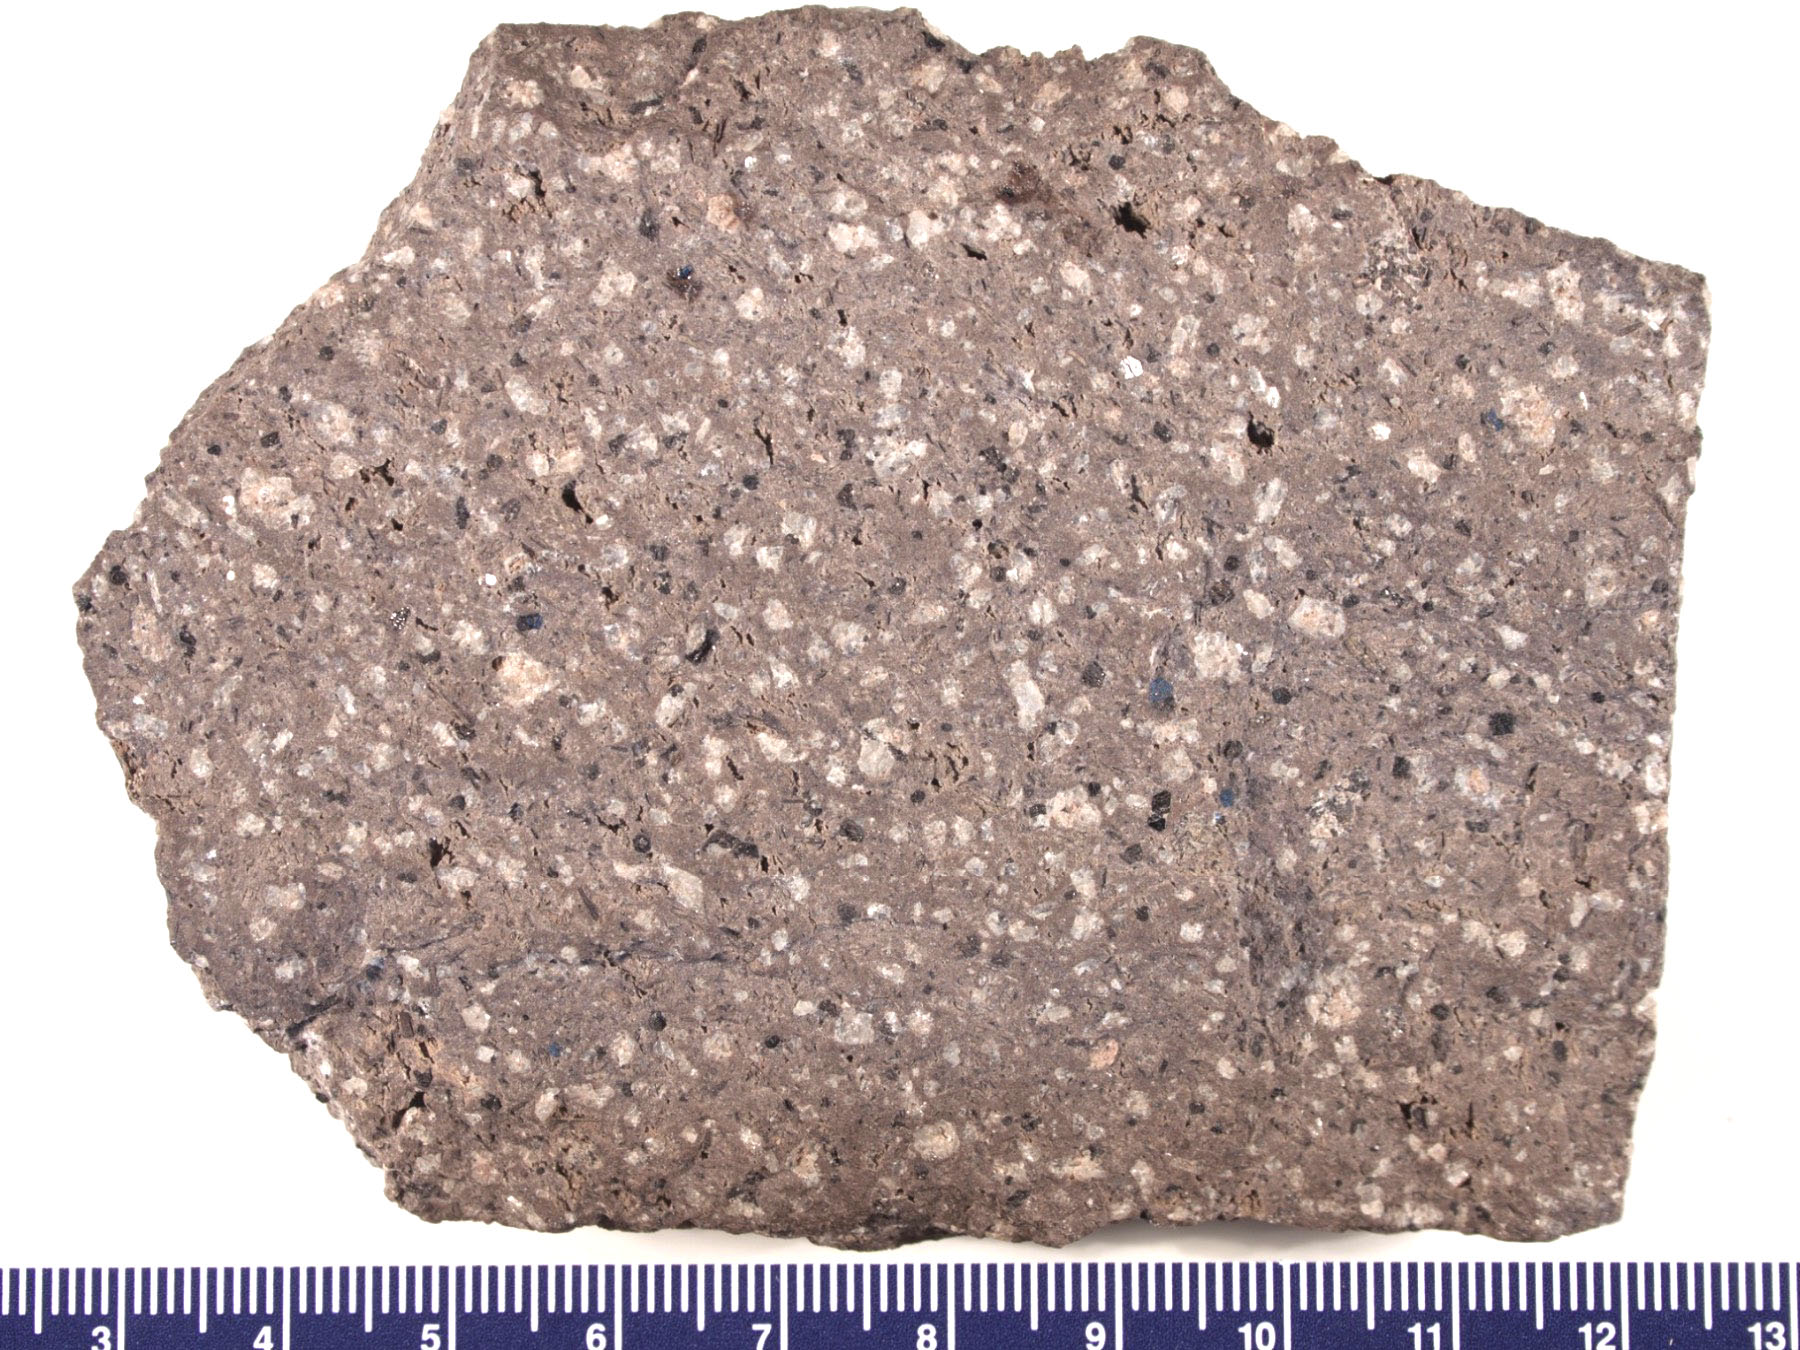 Andesite Hand Sample